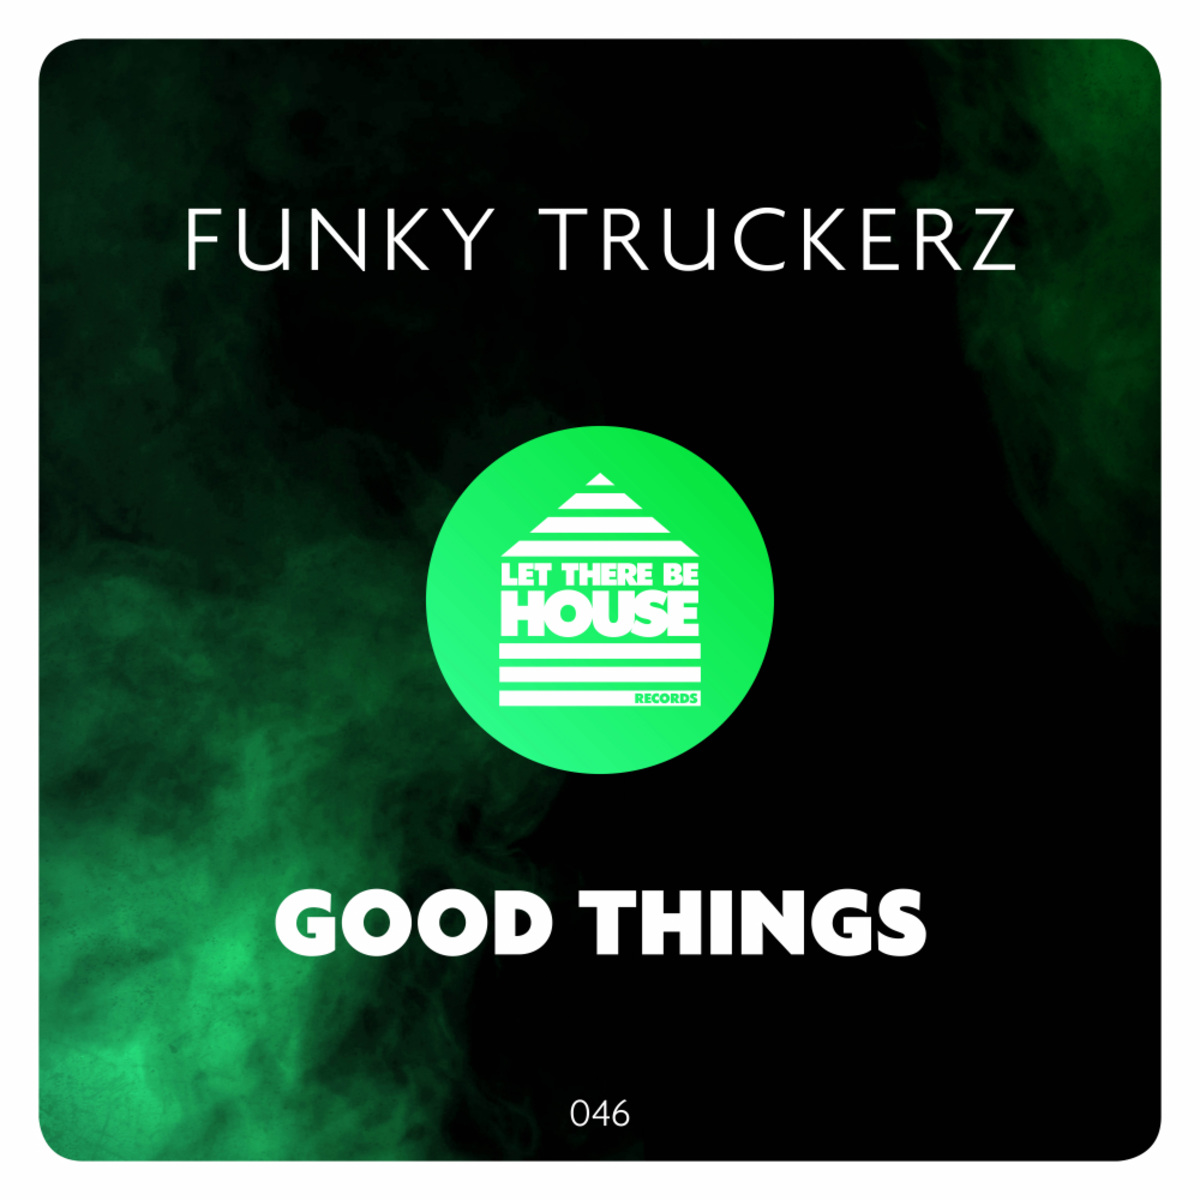 Funky Truckerz - Good Things / Let There Be House Records